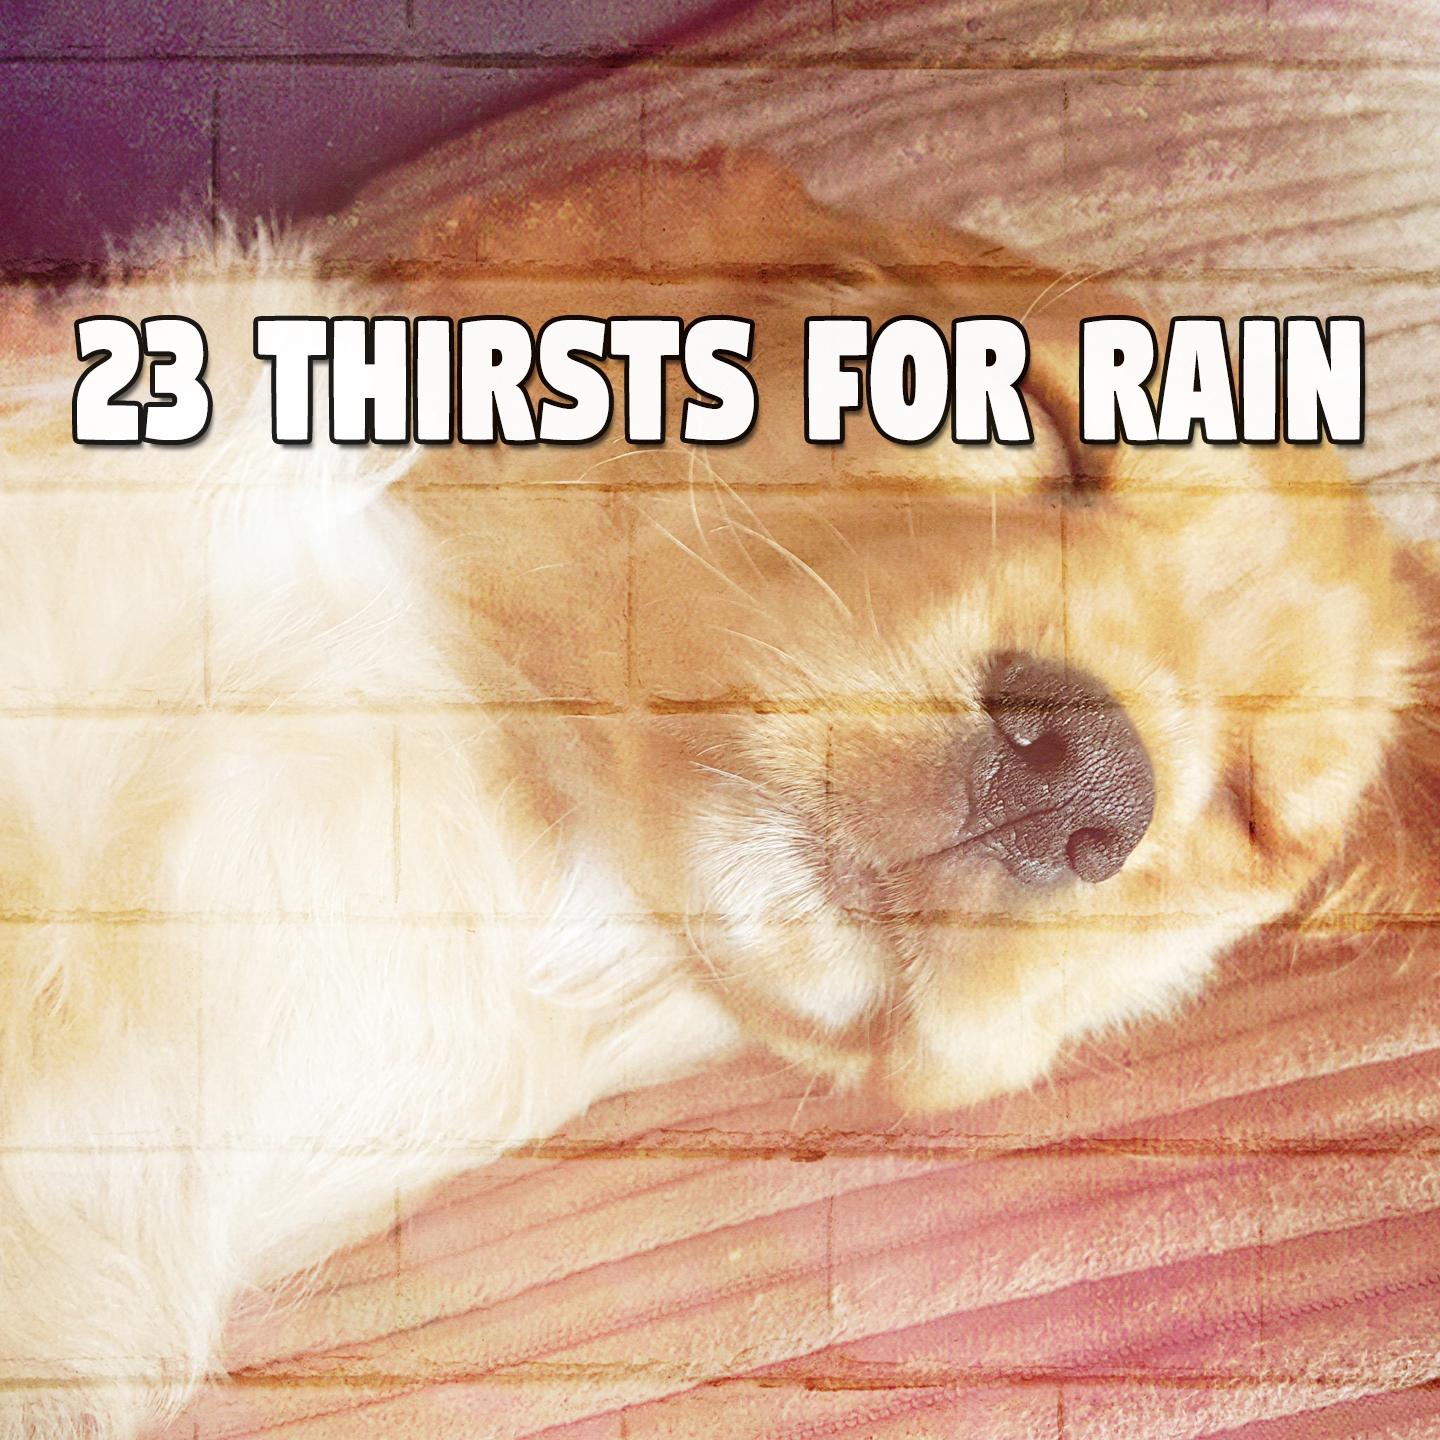 23 Thirsts for Rain